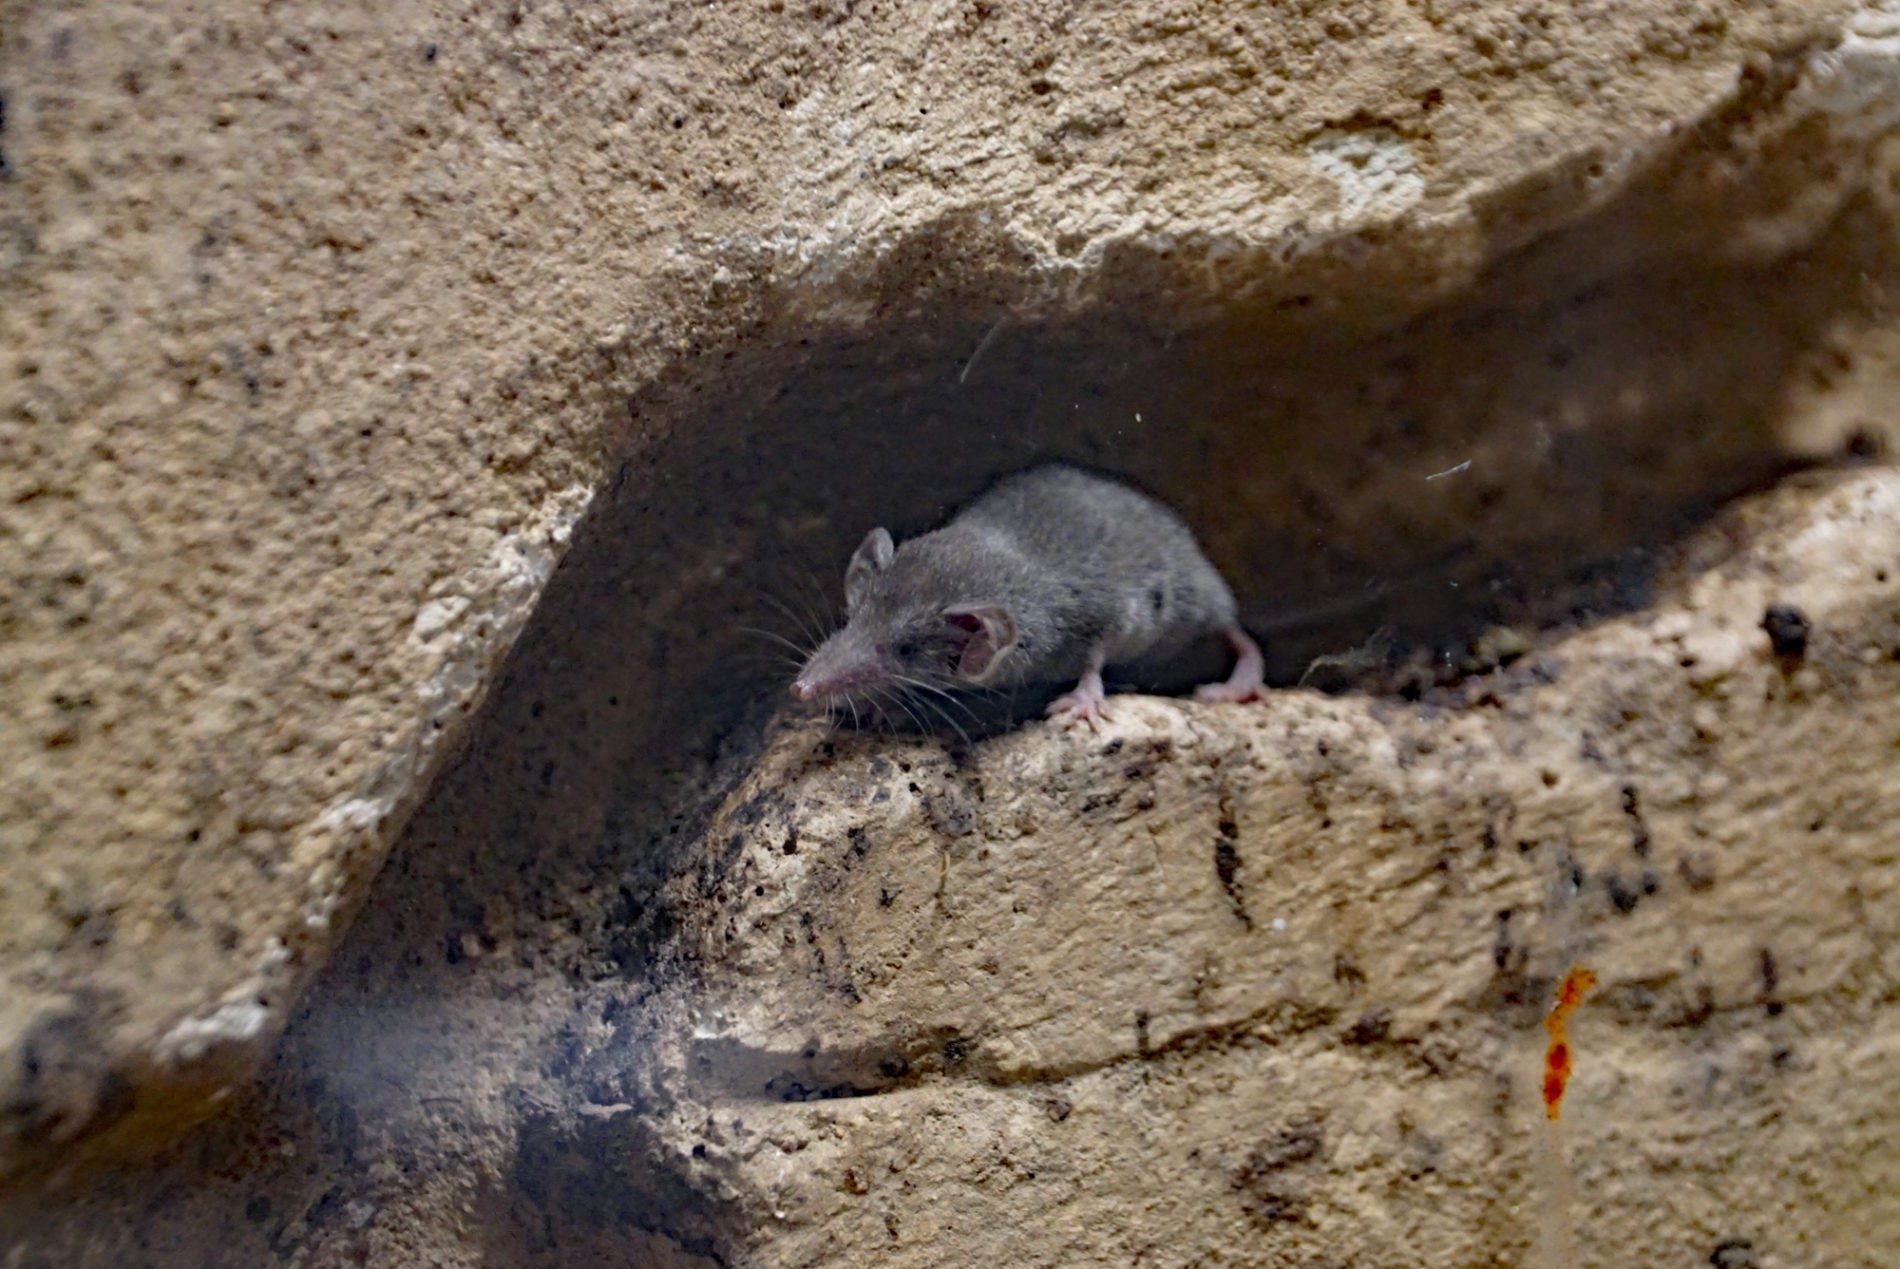 White-toothed pygmy shrew